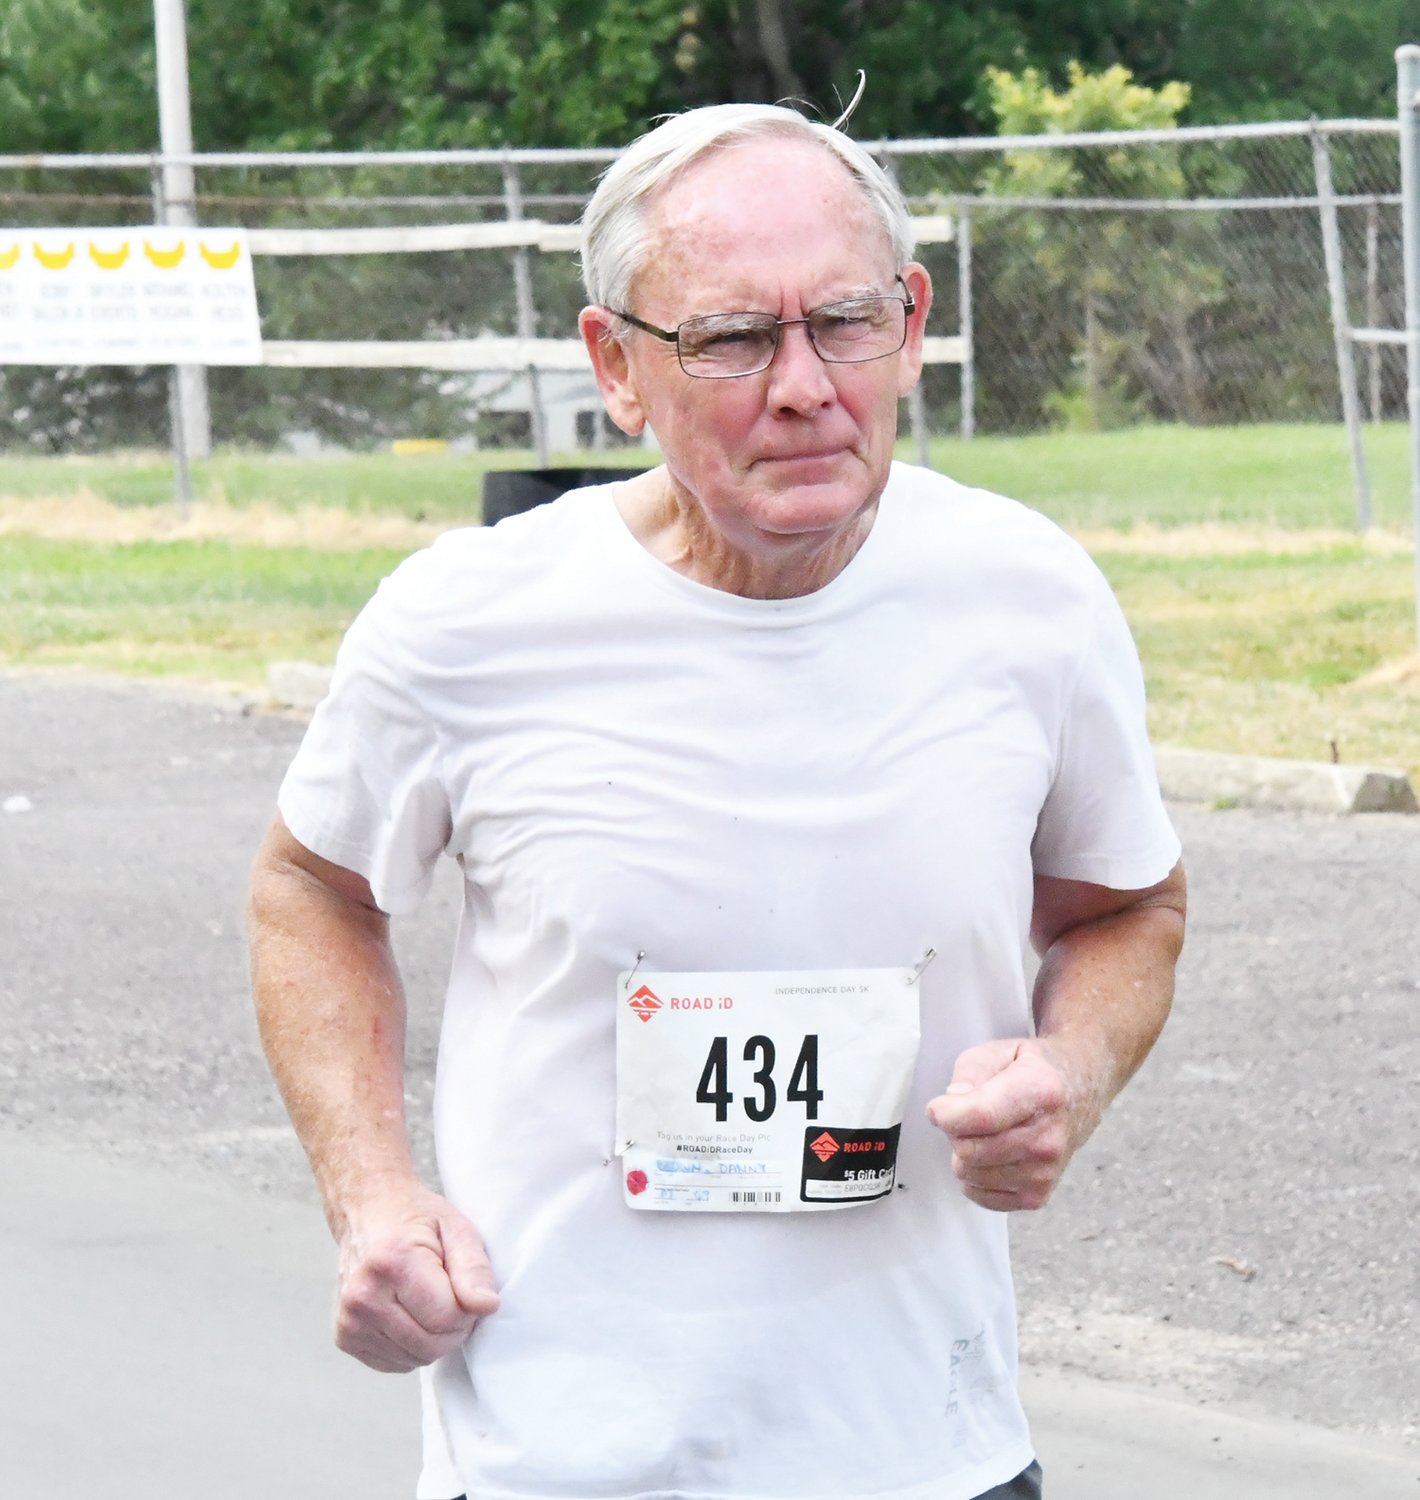 Danny Brown was one of the top finishers in the 60-over men's division.